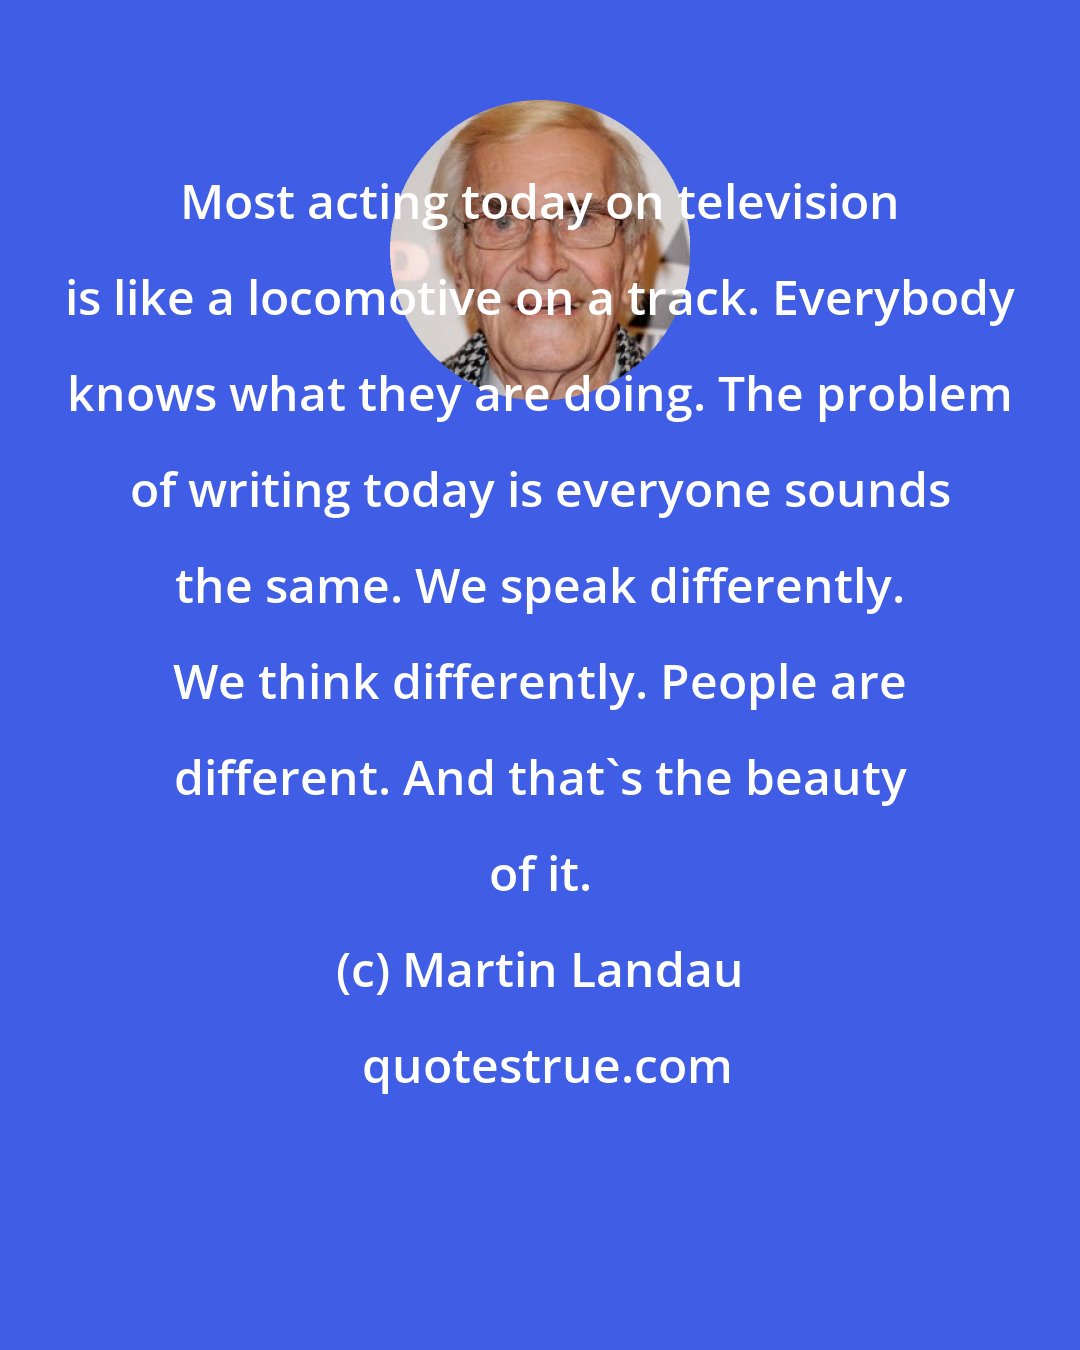 Martin Landau: Most acting today on television is like a locomotive on a track. Everybody knows what they are doing. The problem of writing today is everyone sounds the same. We speak differently. We think differently. People are different. And that's the beauty of it.